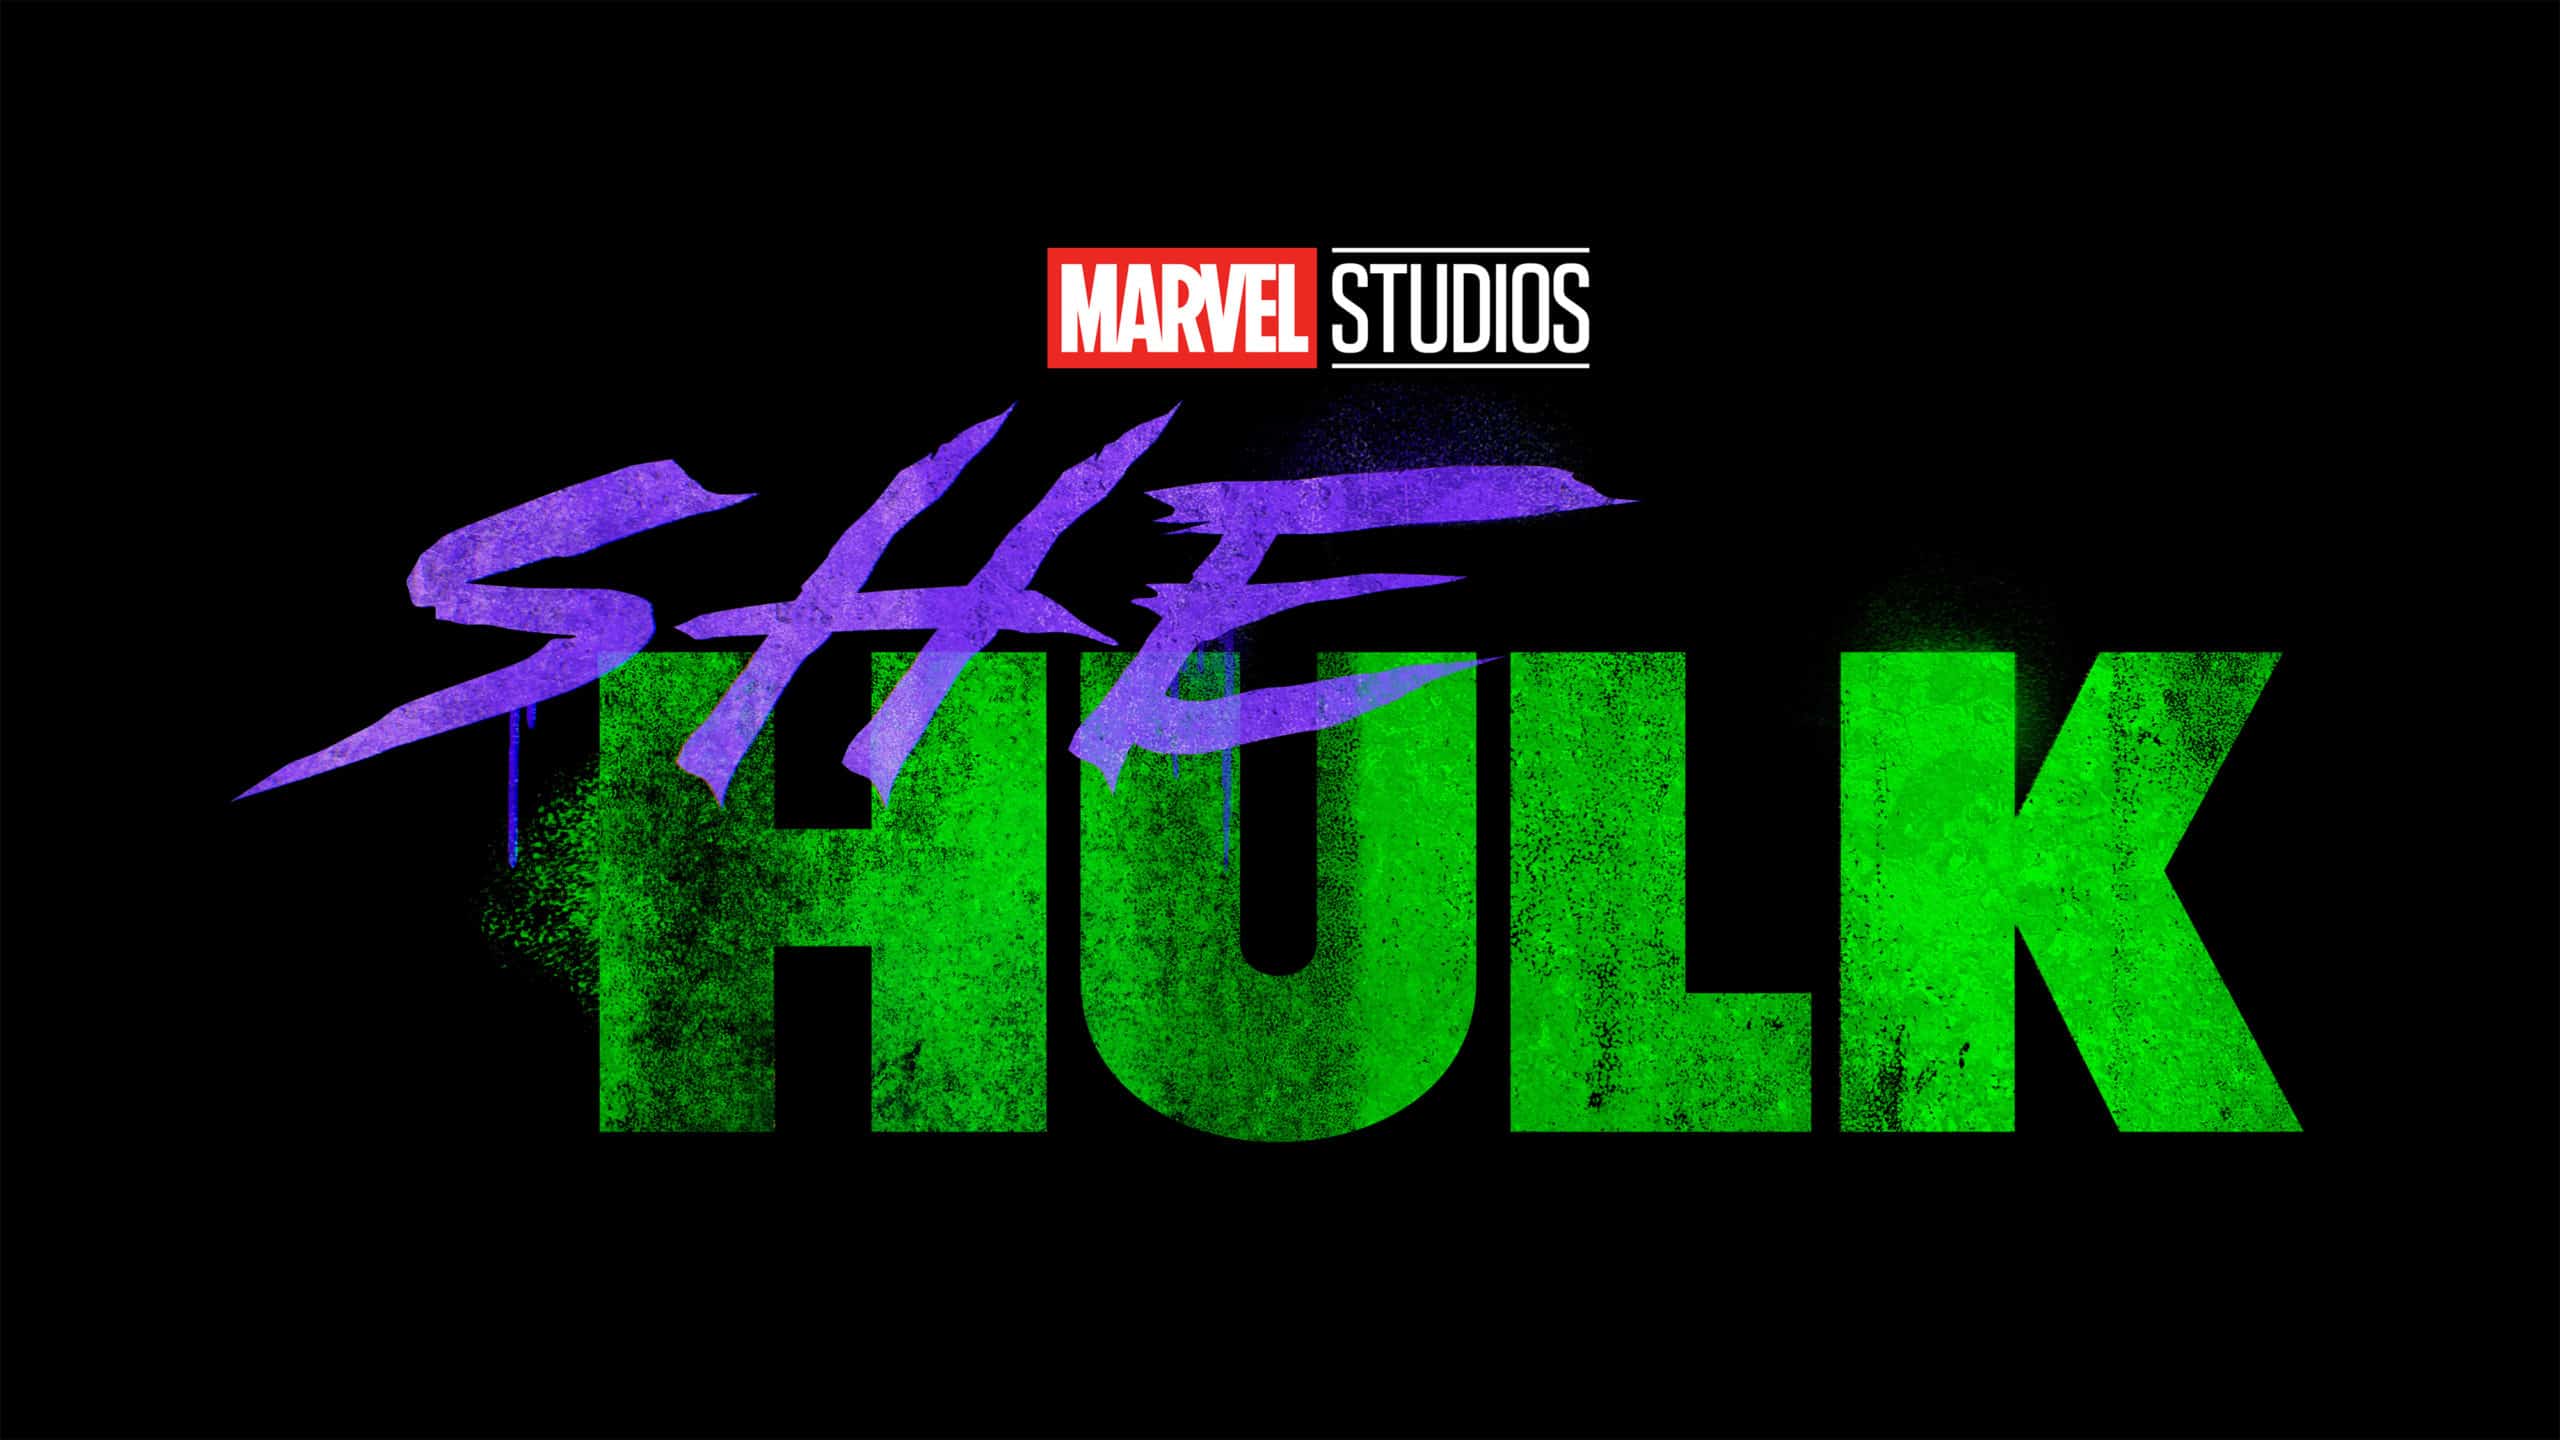 How the “She-Hulk” TV Show Fits Into the Marvel Cinematic Universe